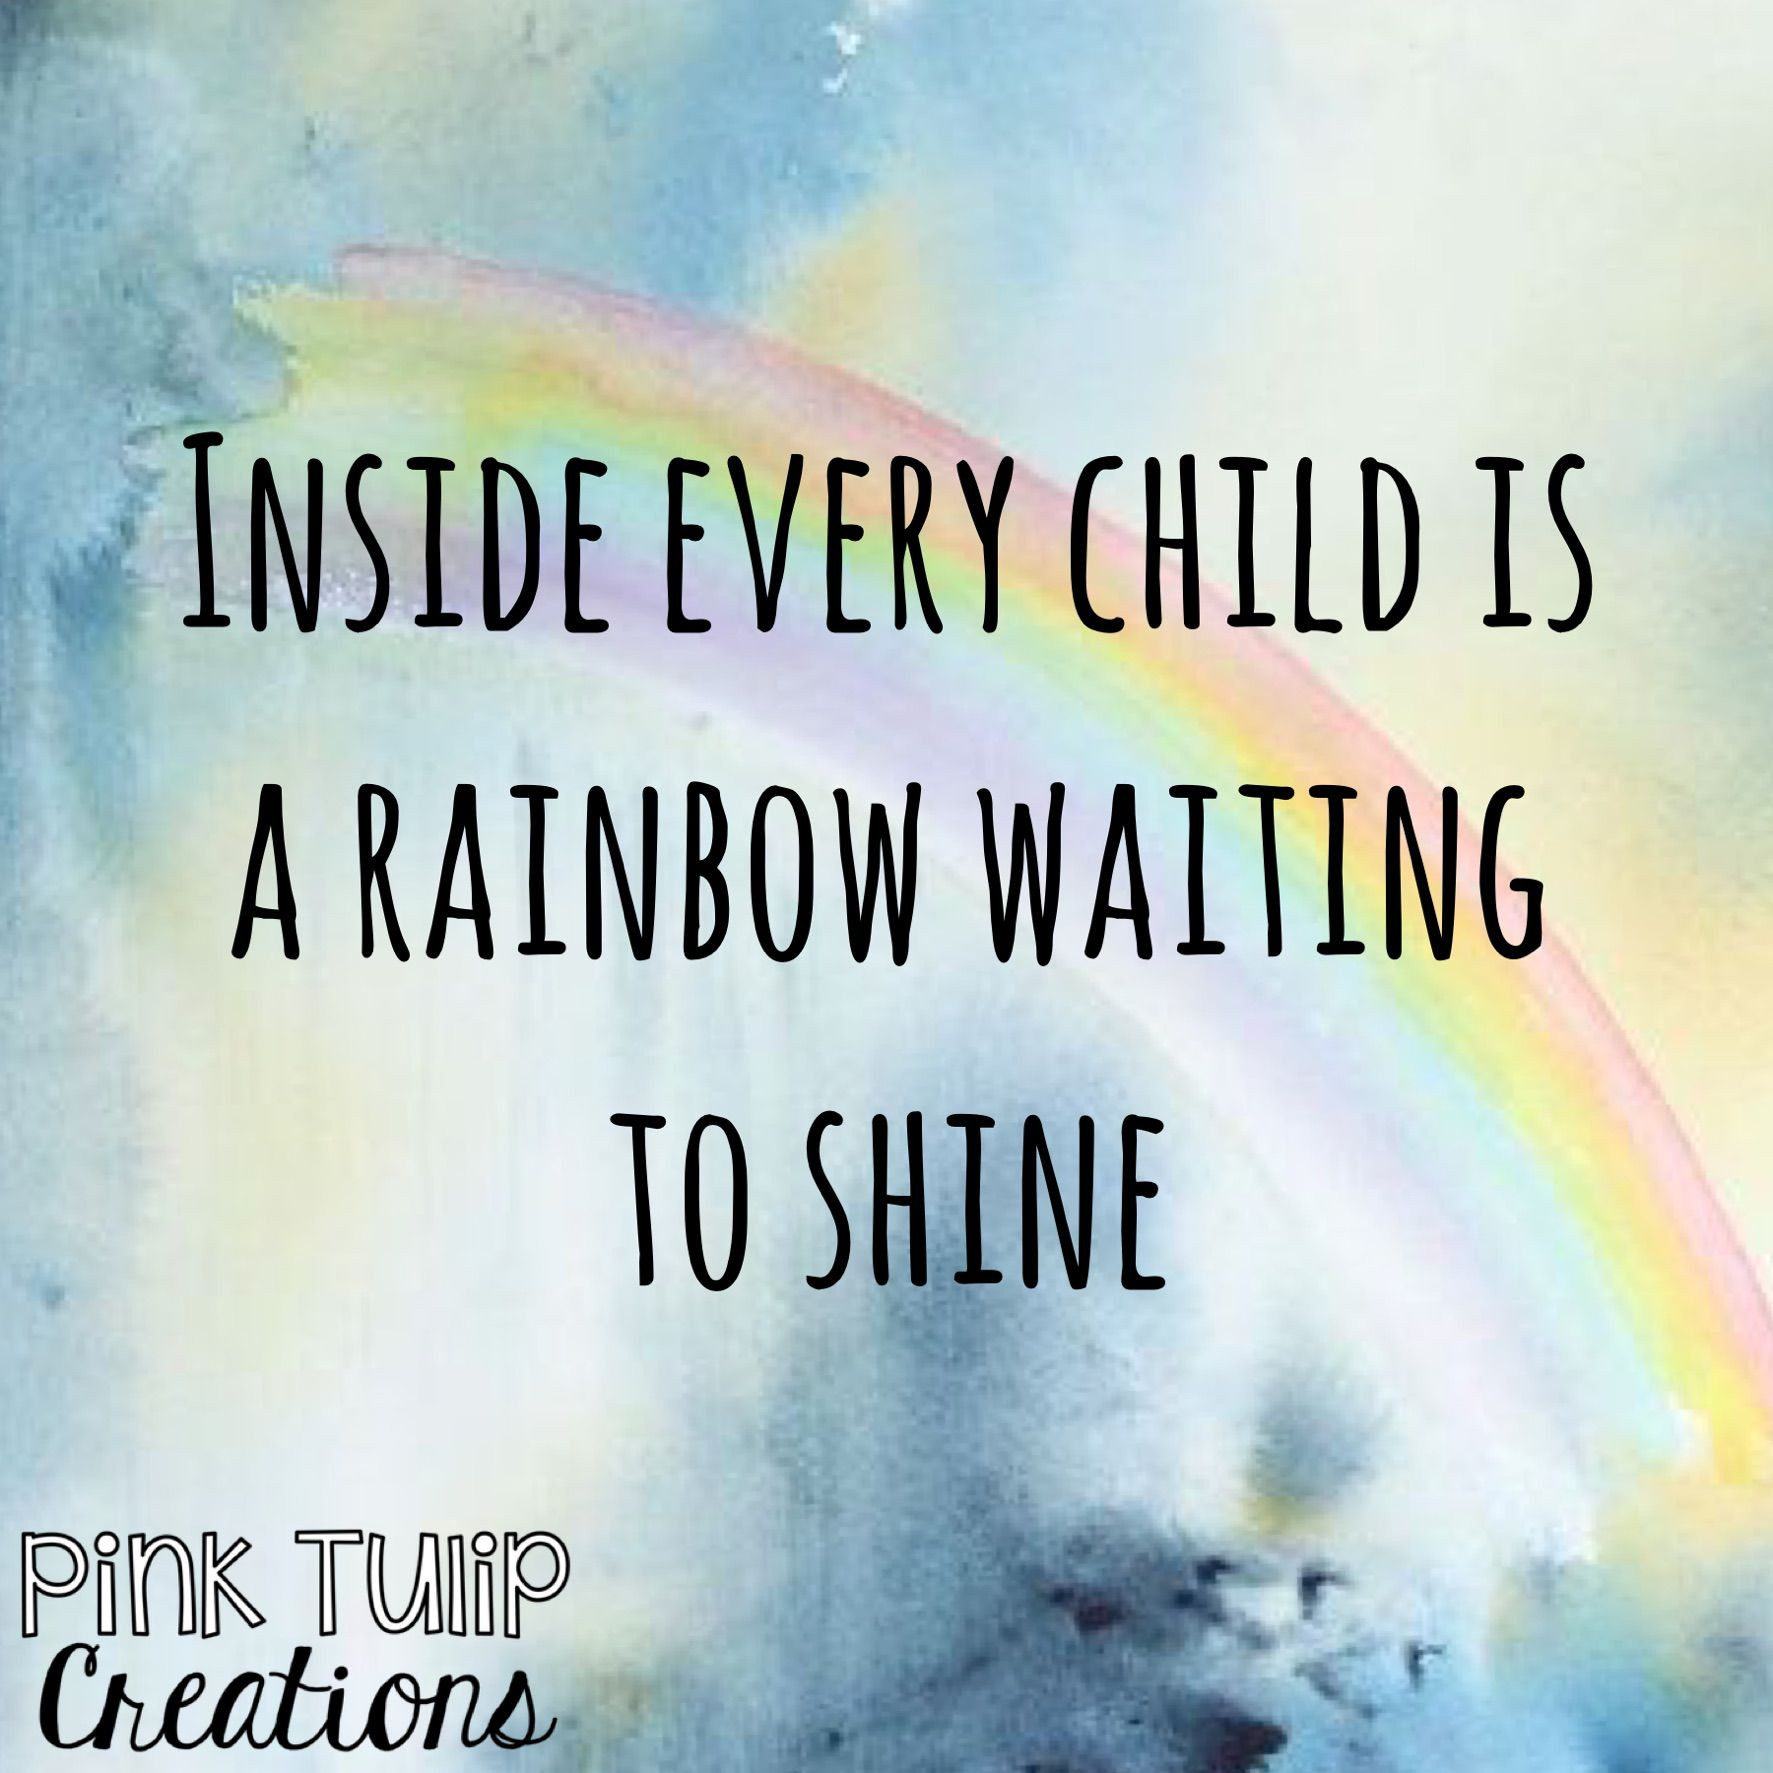 Children Educational Quotes
 Inside every child is a rainbow waiting to shine